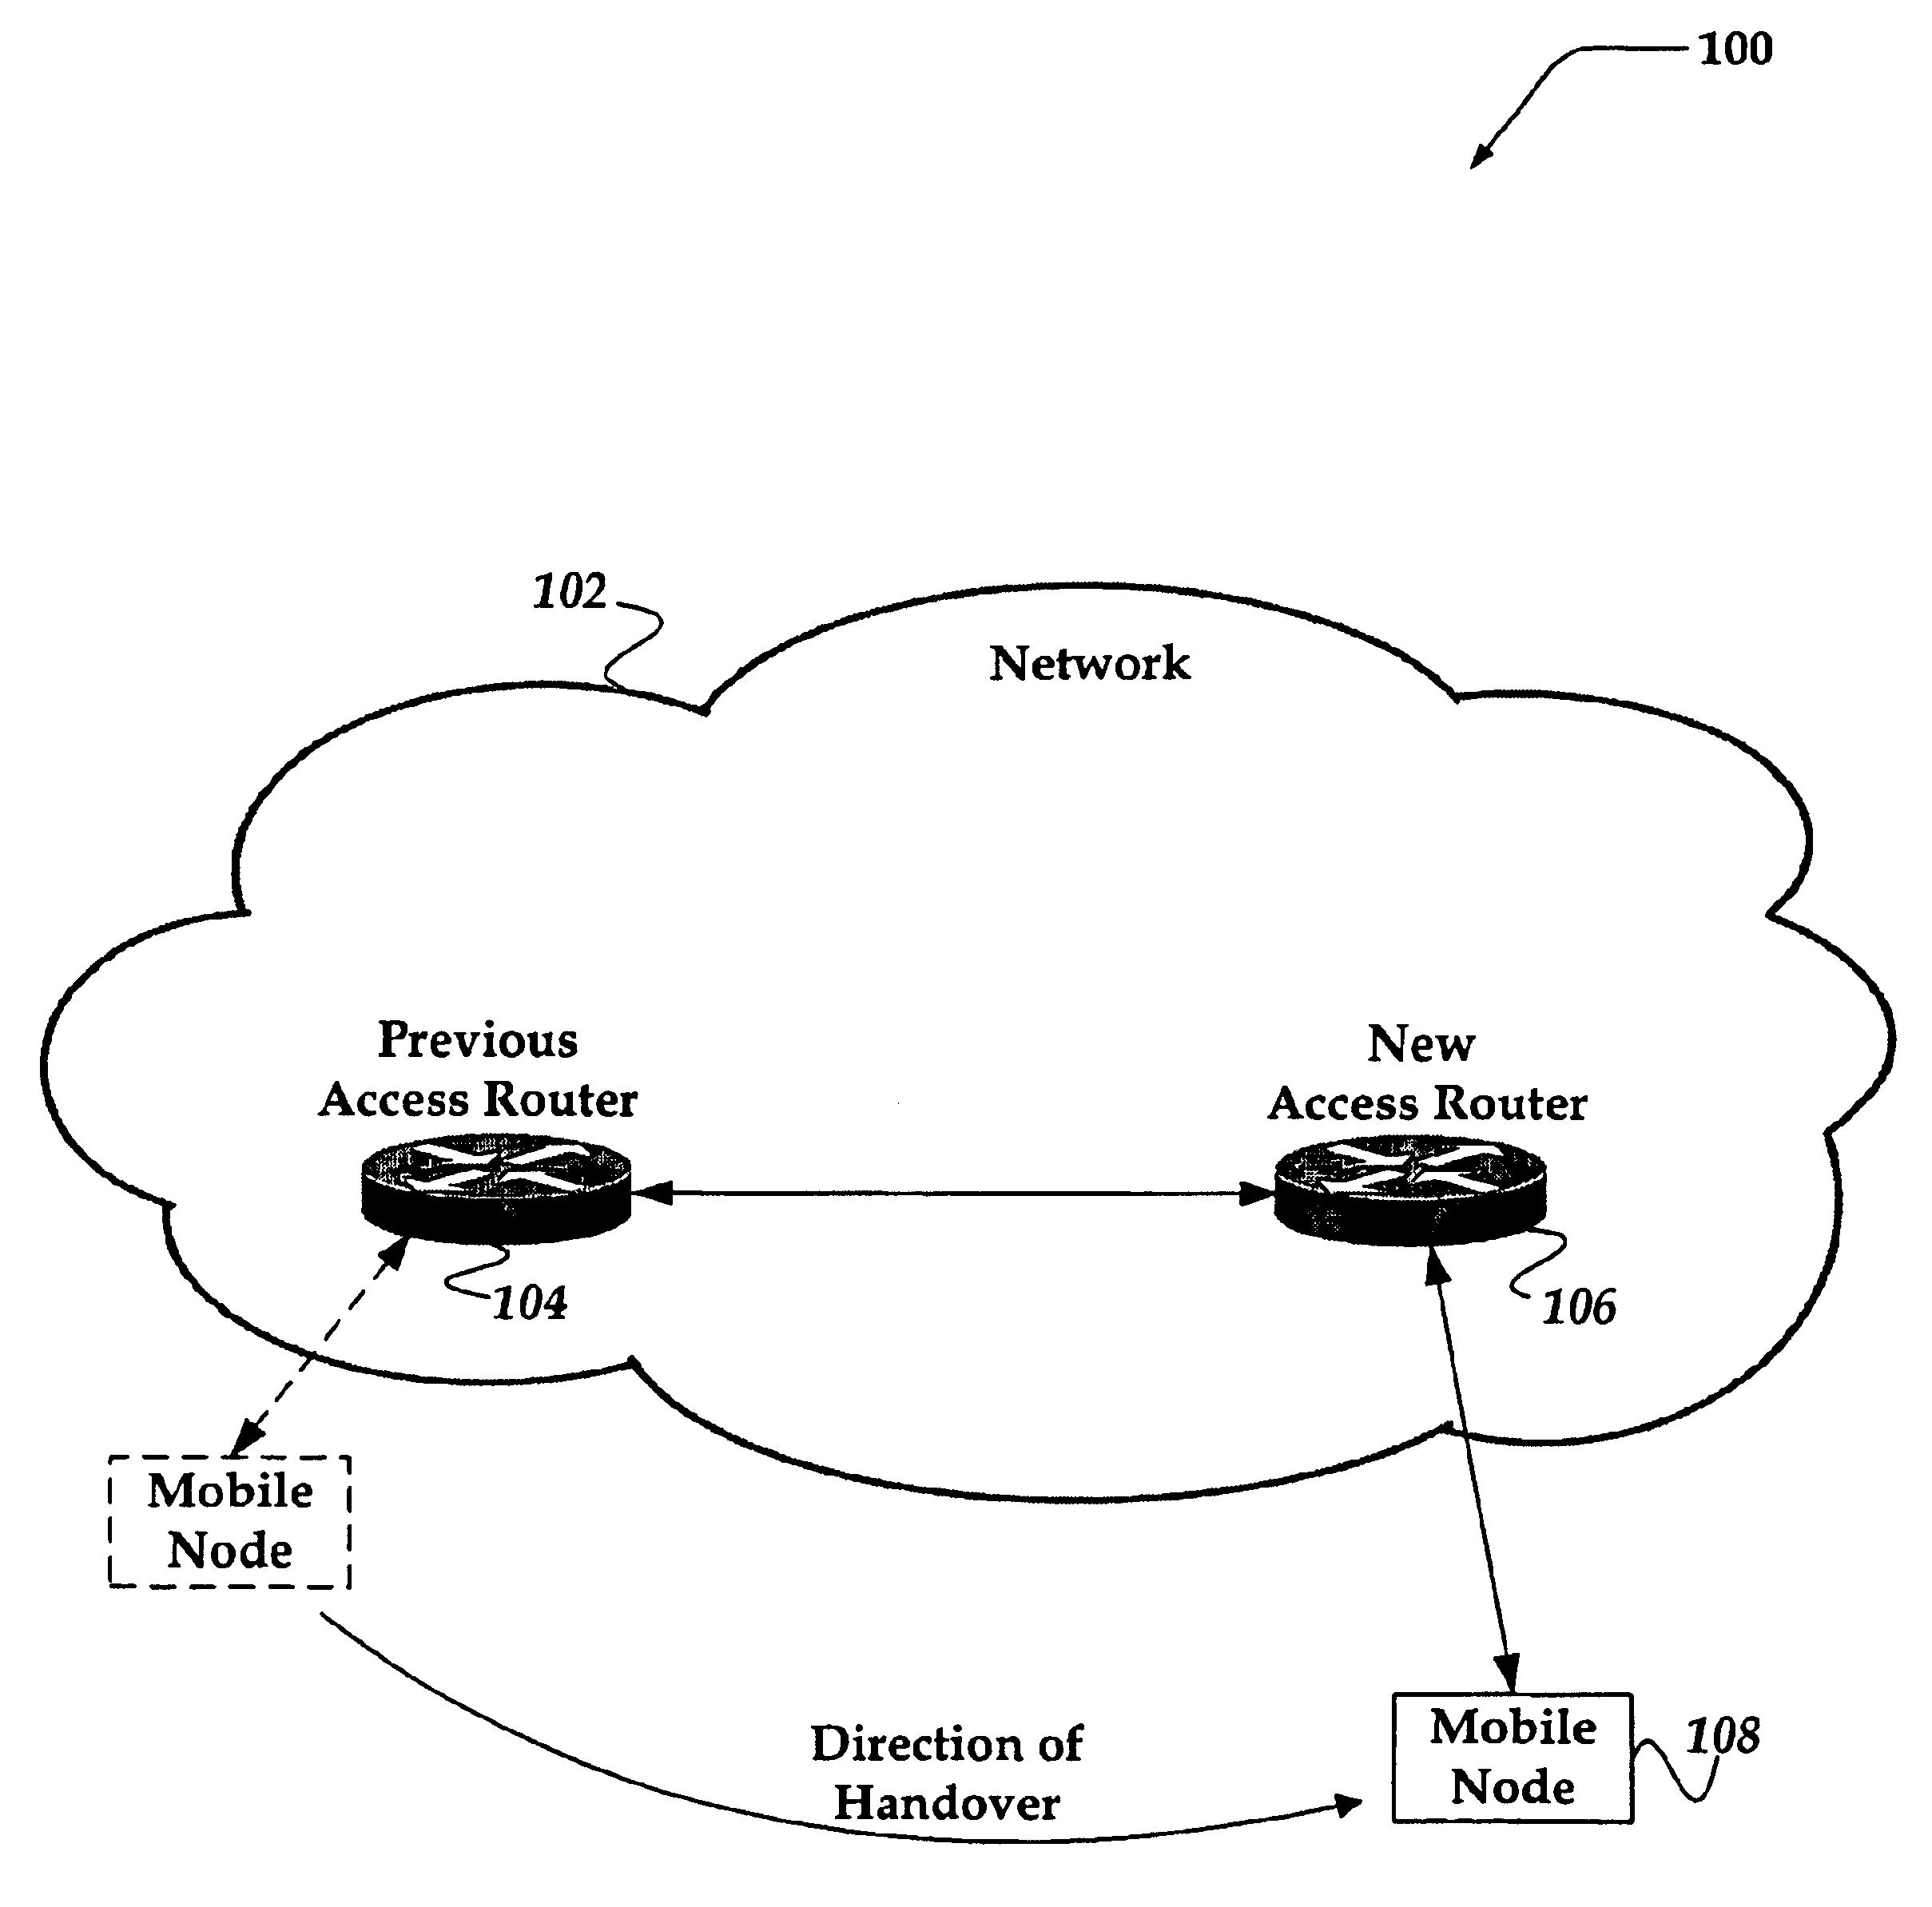 Method and system for fast IP connectivity in a mobile network